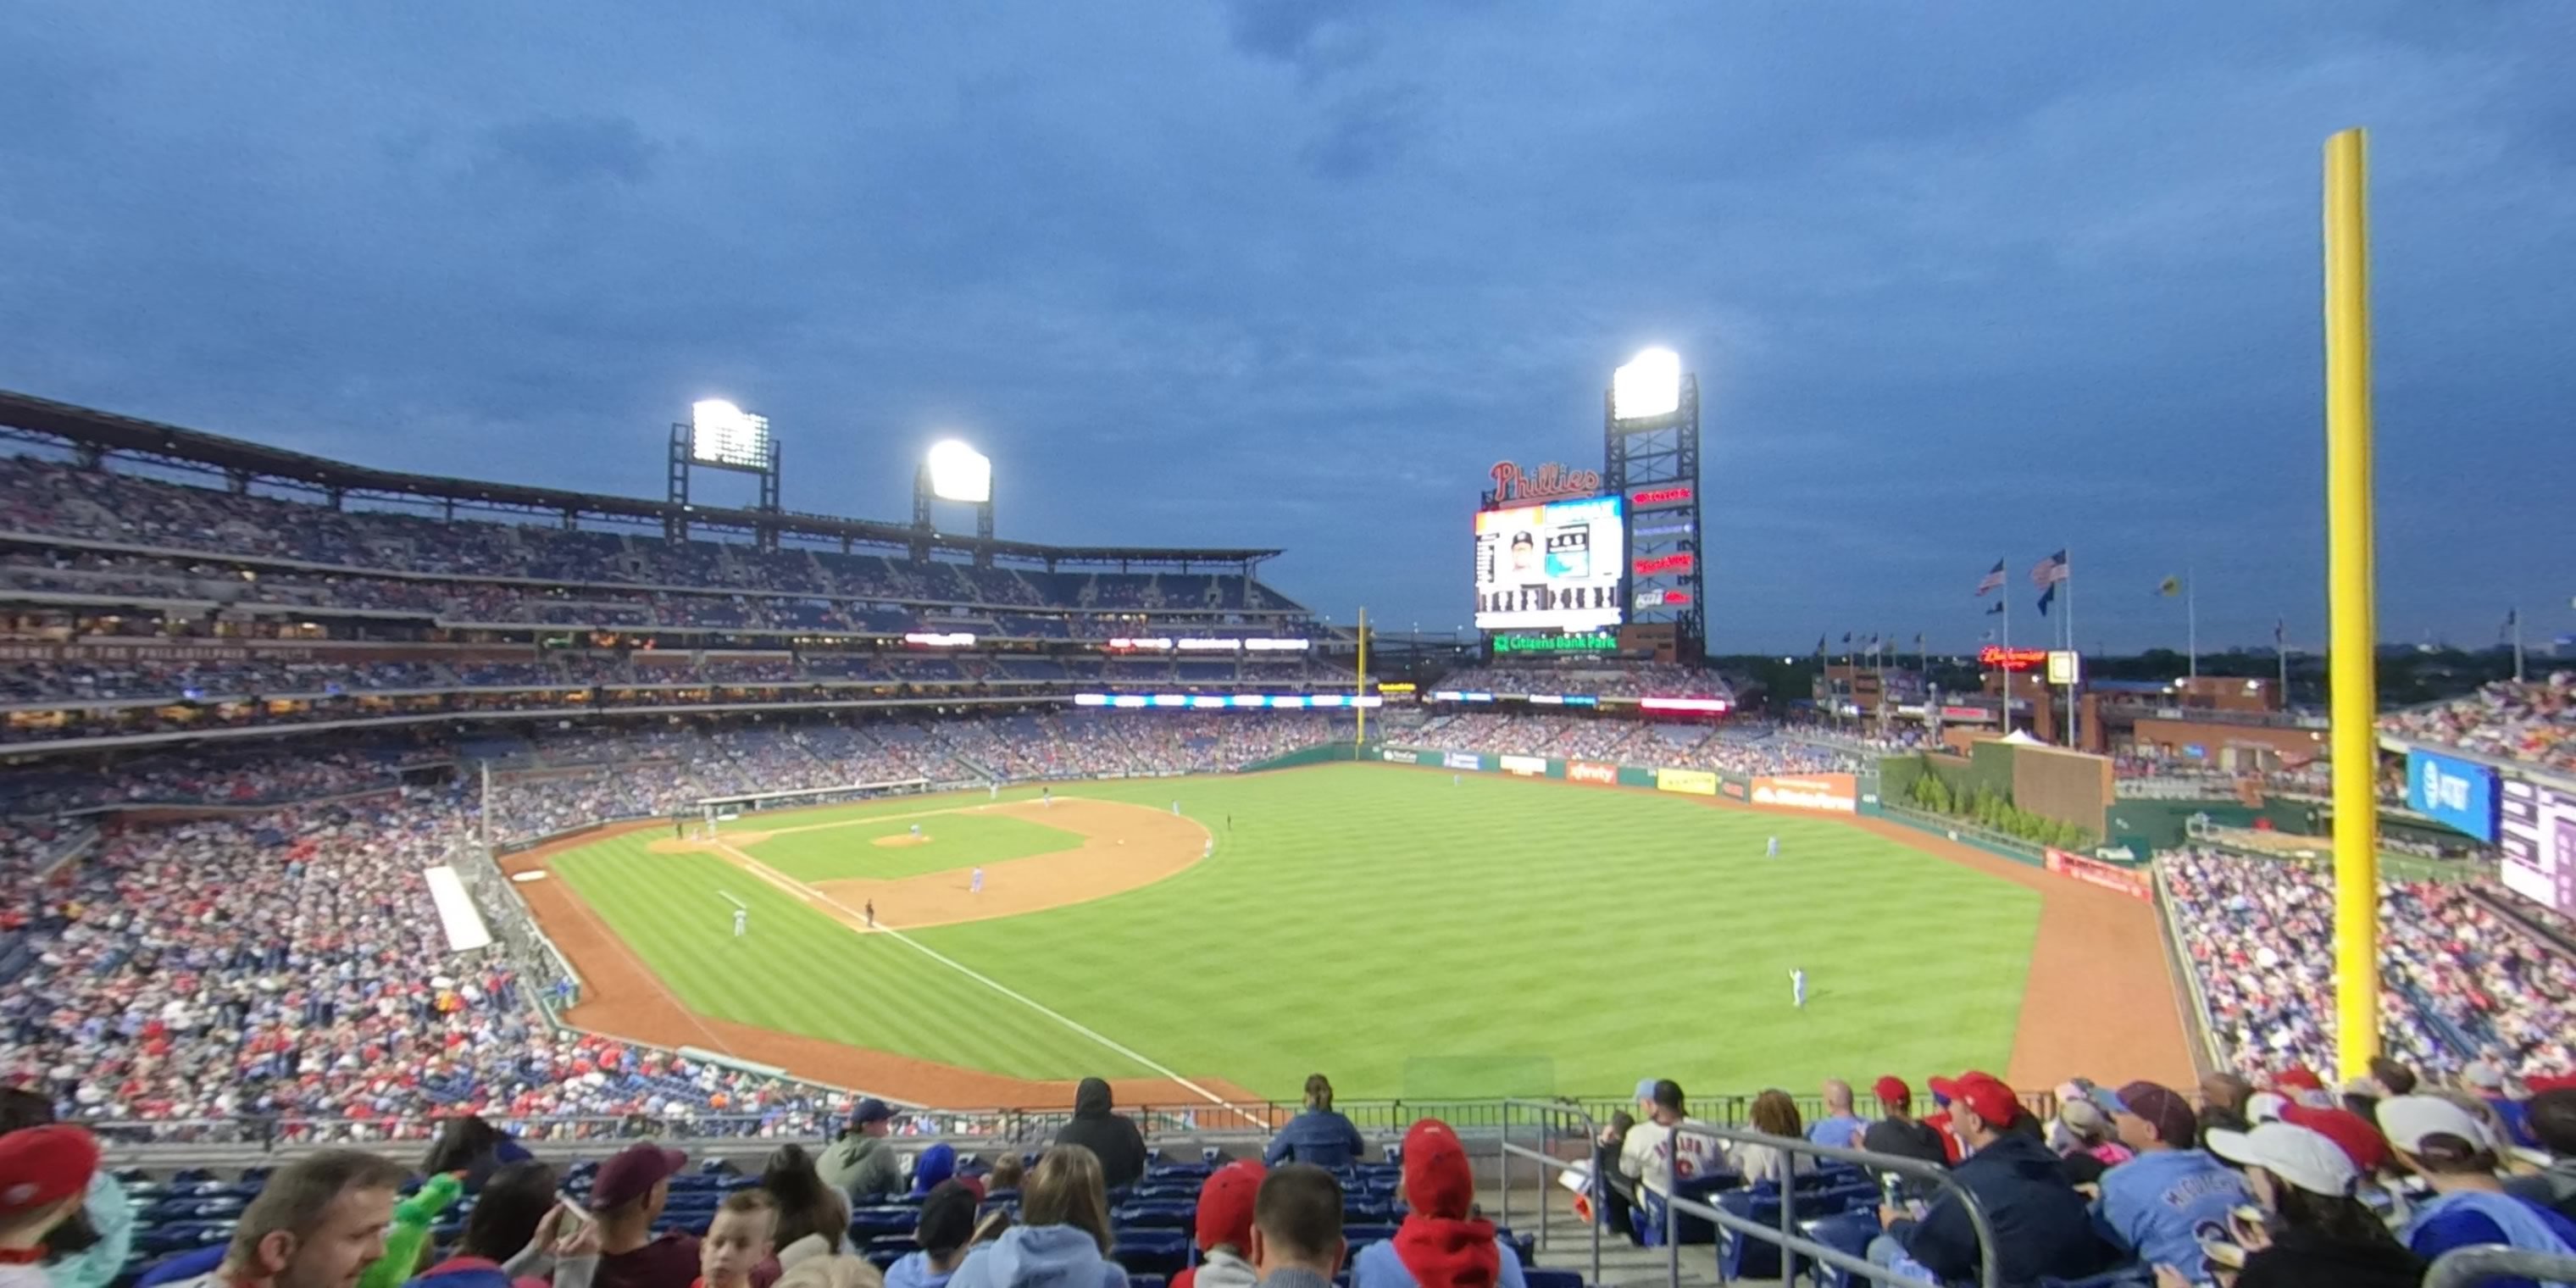 section 207 panoramic seat view  for baseball - citizens bank park